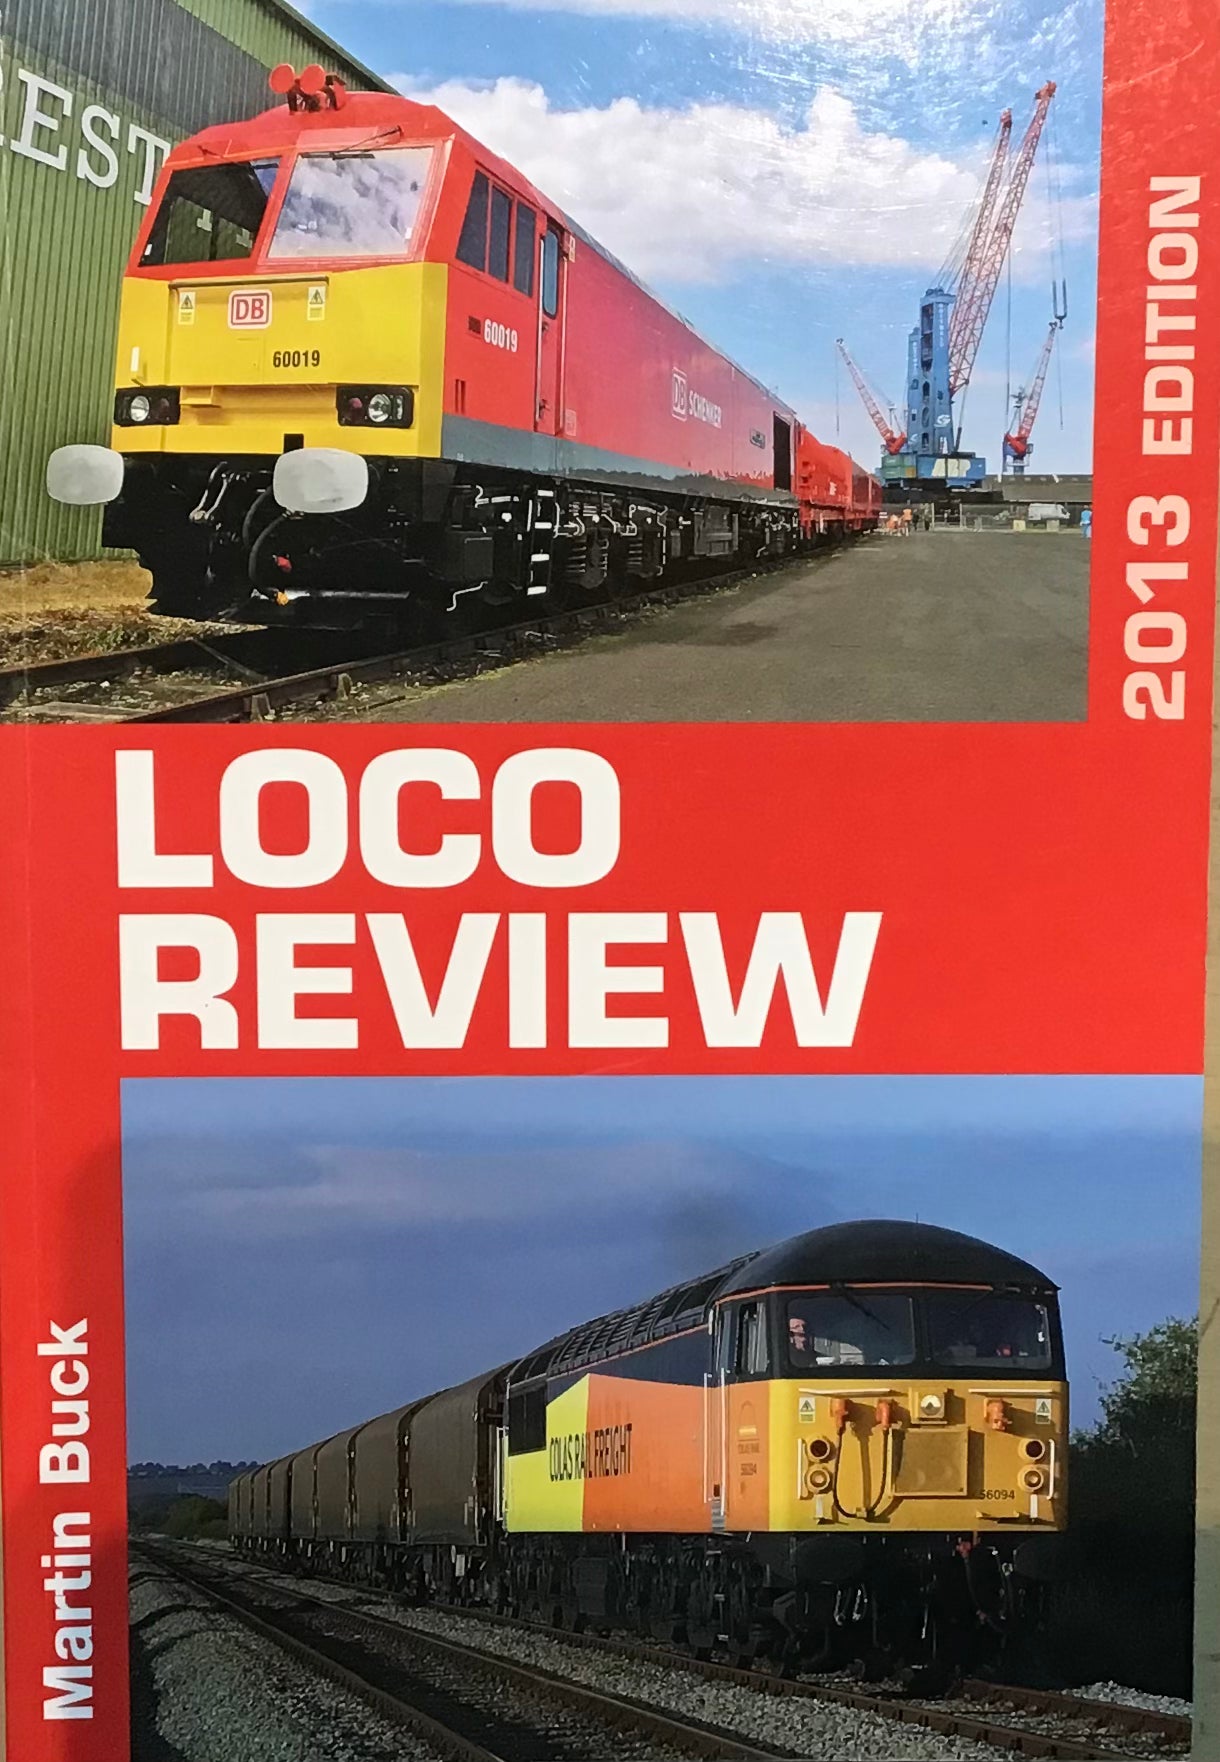 Loco Review 2013 Edition by Martin Buck - Chester Model Centre